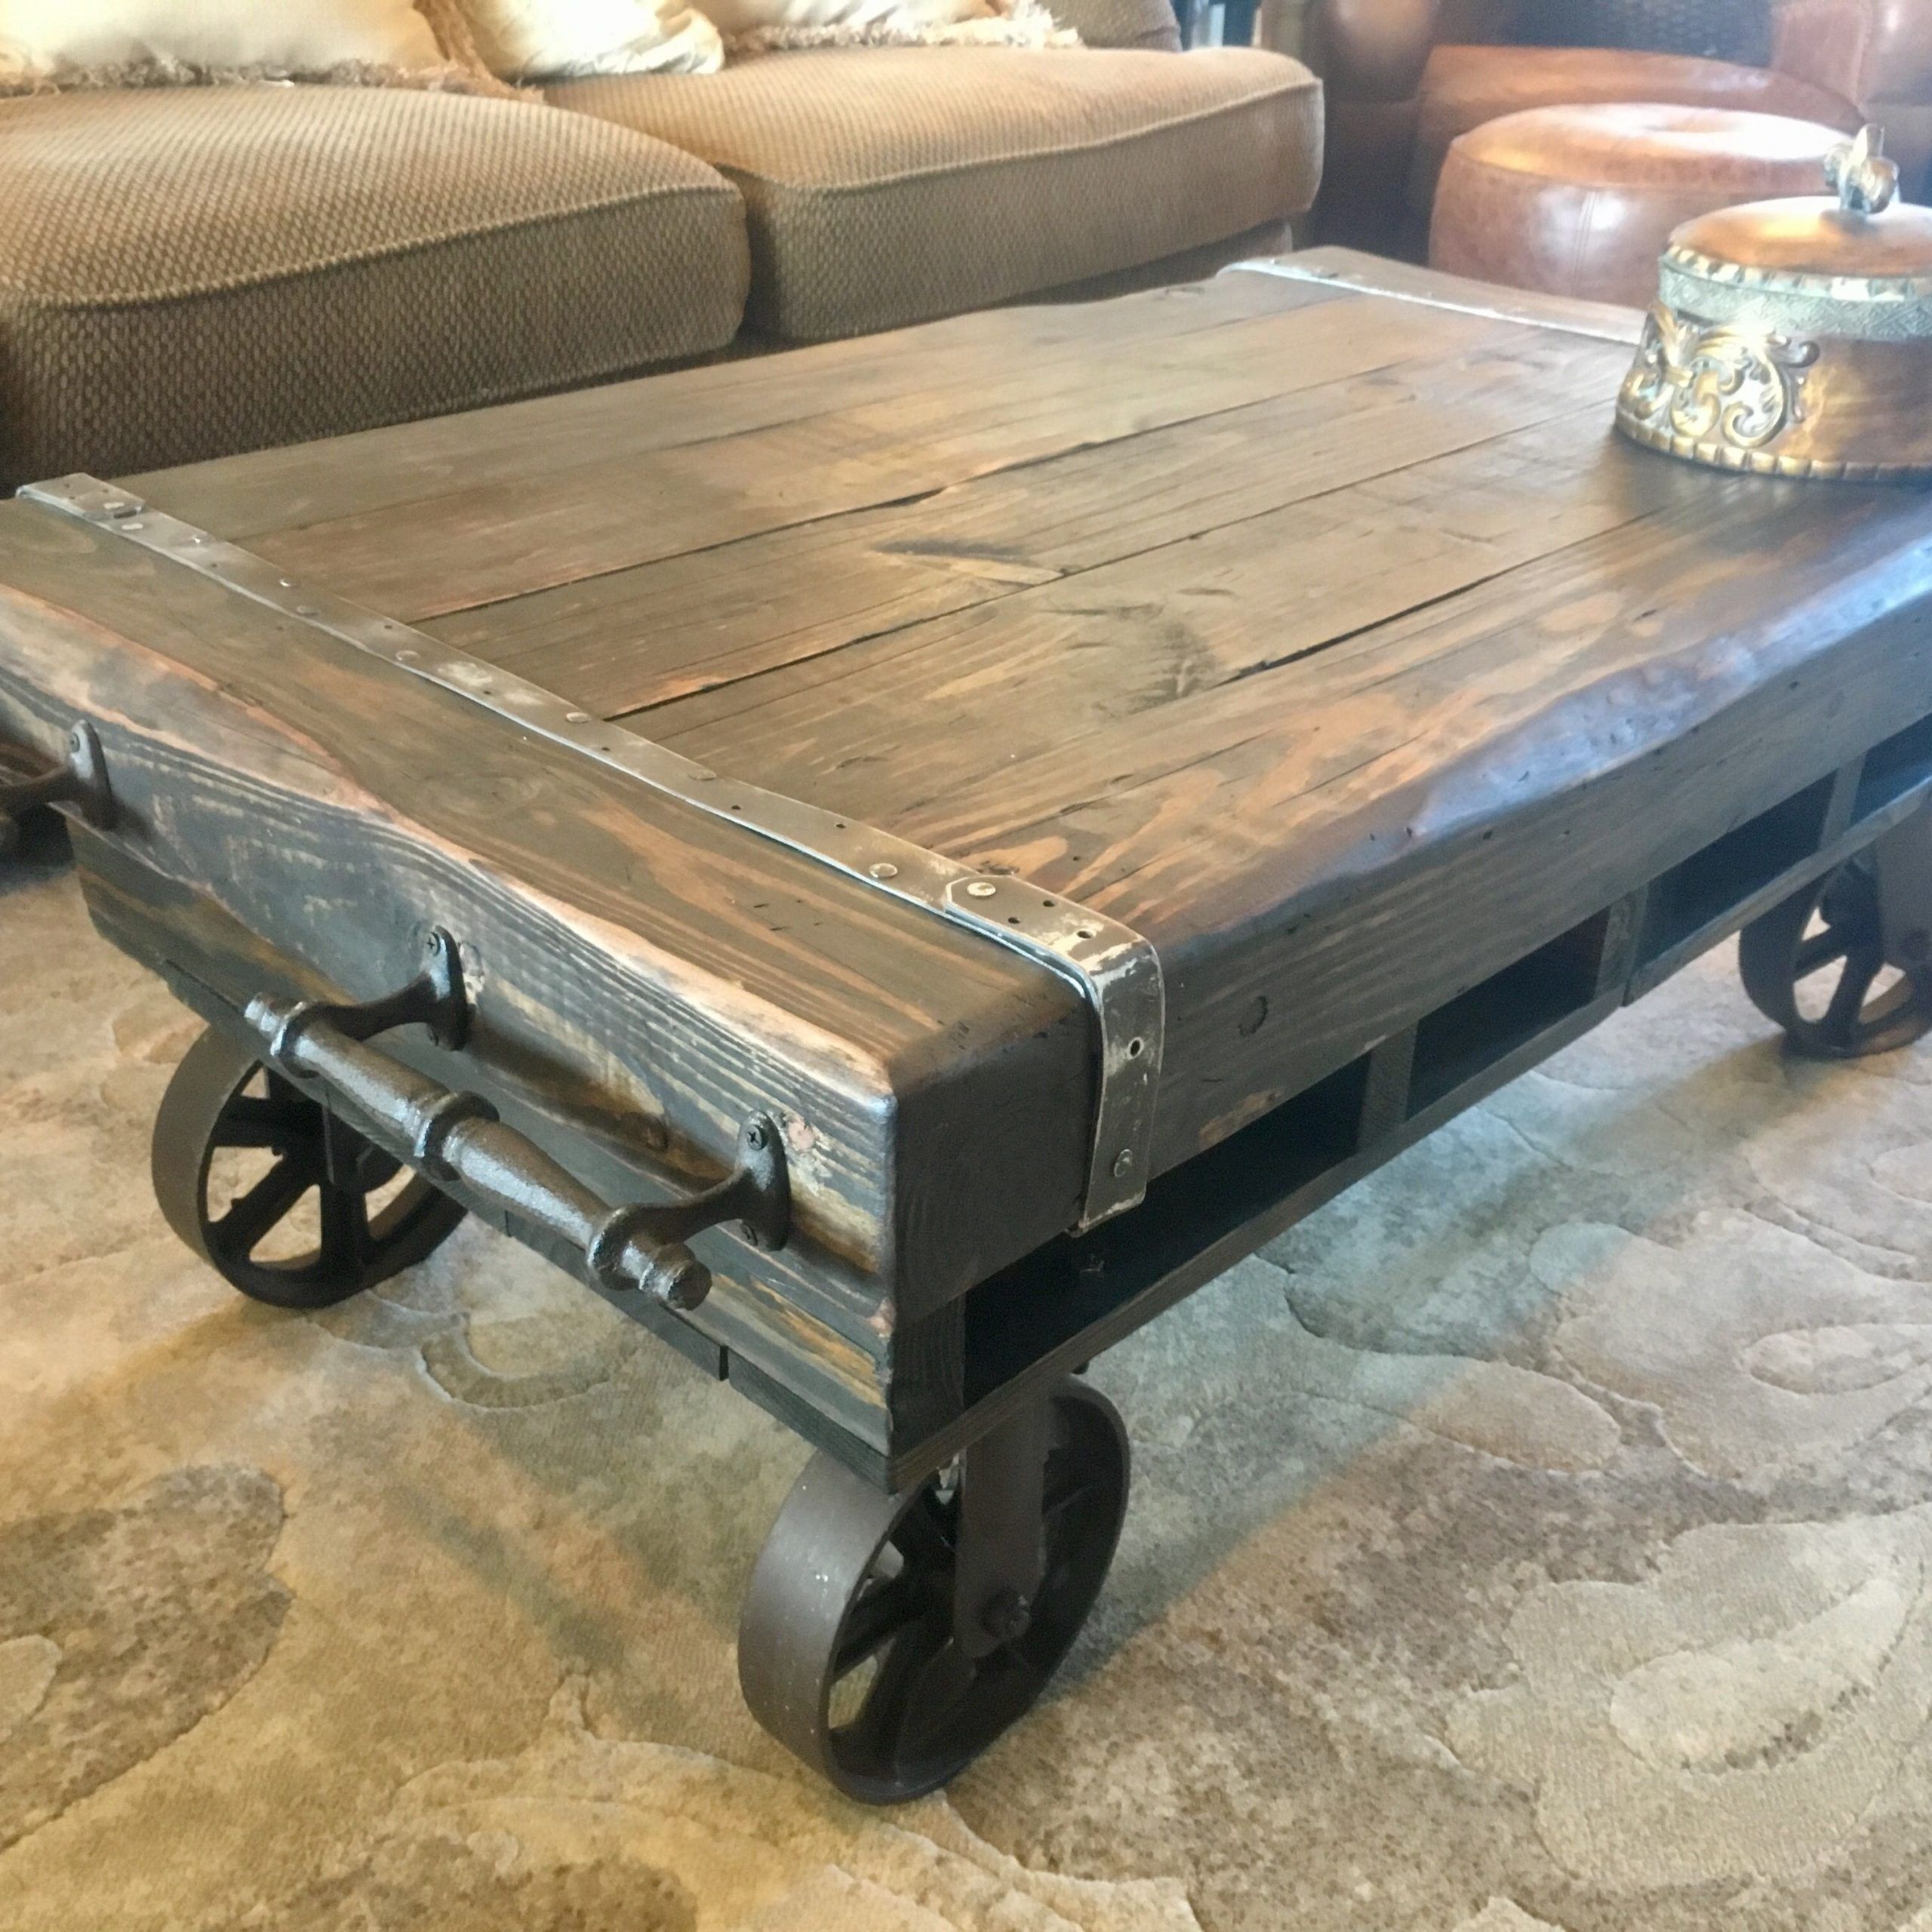 Rustic Factory Cart Coffee Table From Bacs Designs | Rustic Coffee Tables,  Industrial Style Coffee Table, Coffee Table For Coffee Tables With Casters (View 7 of 15)